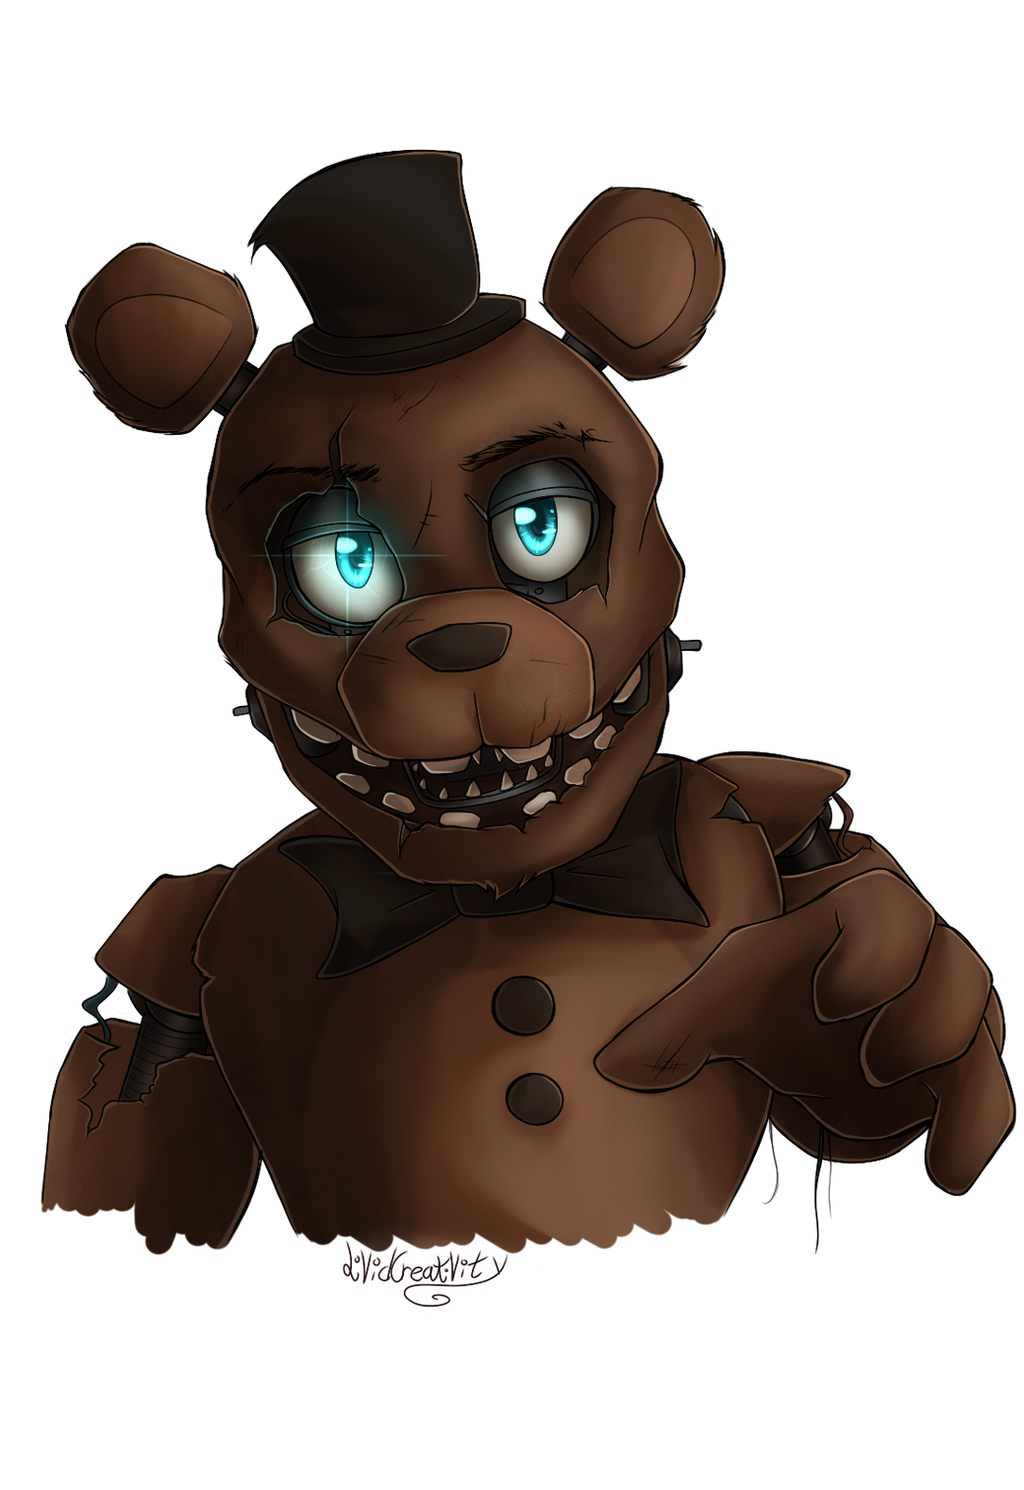 FNAF - Withered Freddy by BootsDotEXE on DeviantArt